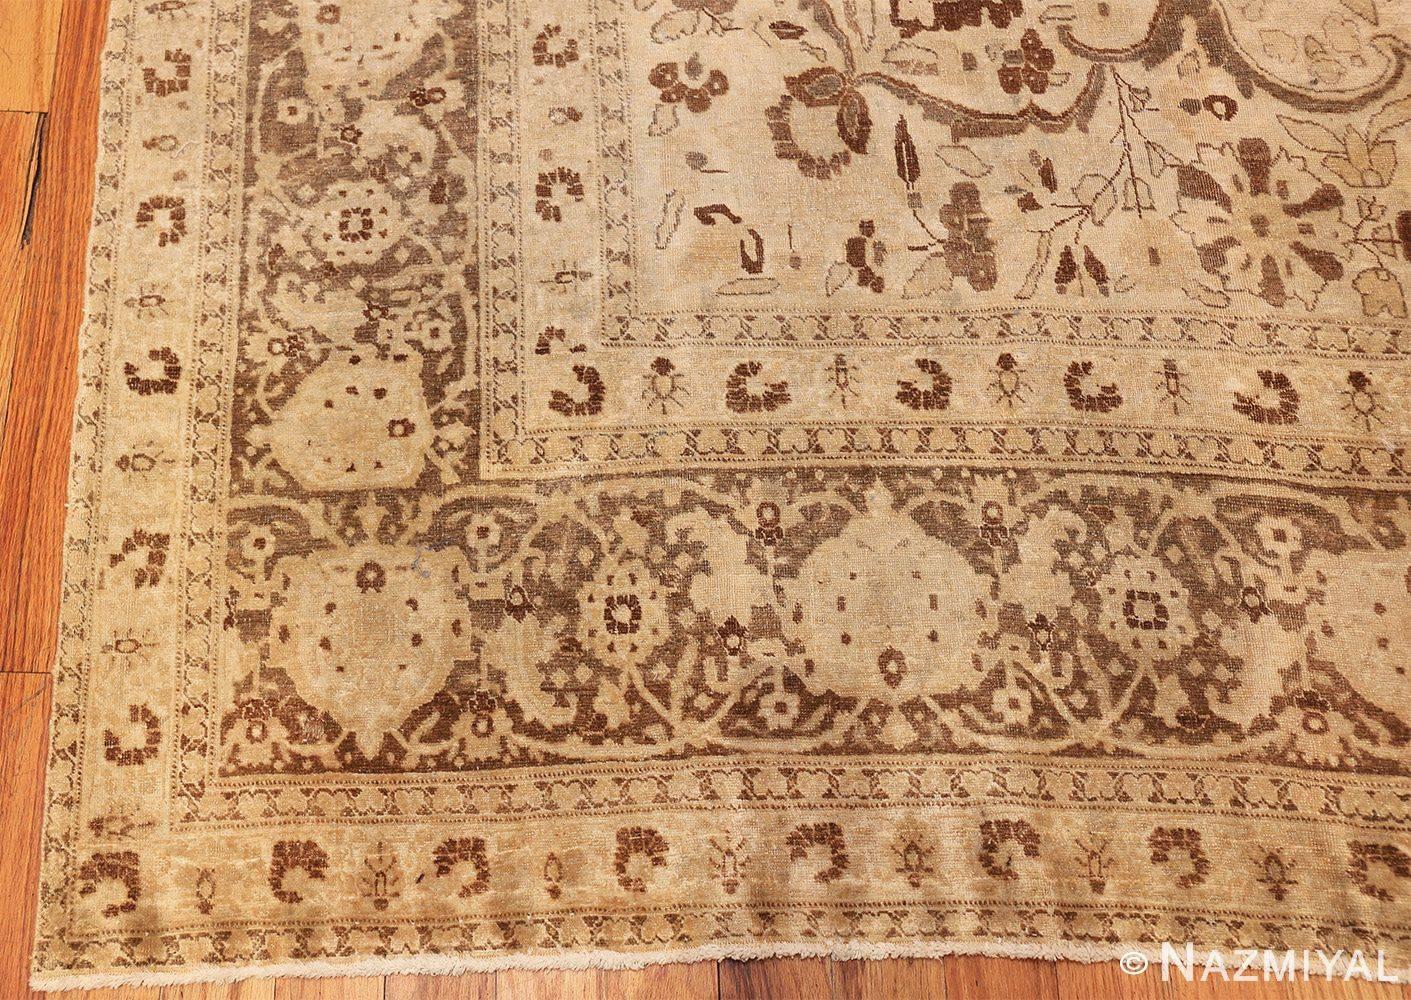 Hand-Knotted Brown Earth Tone Color Antique Vase Design Persian Tabriz Rug